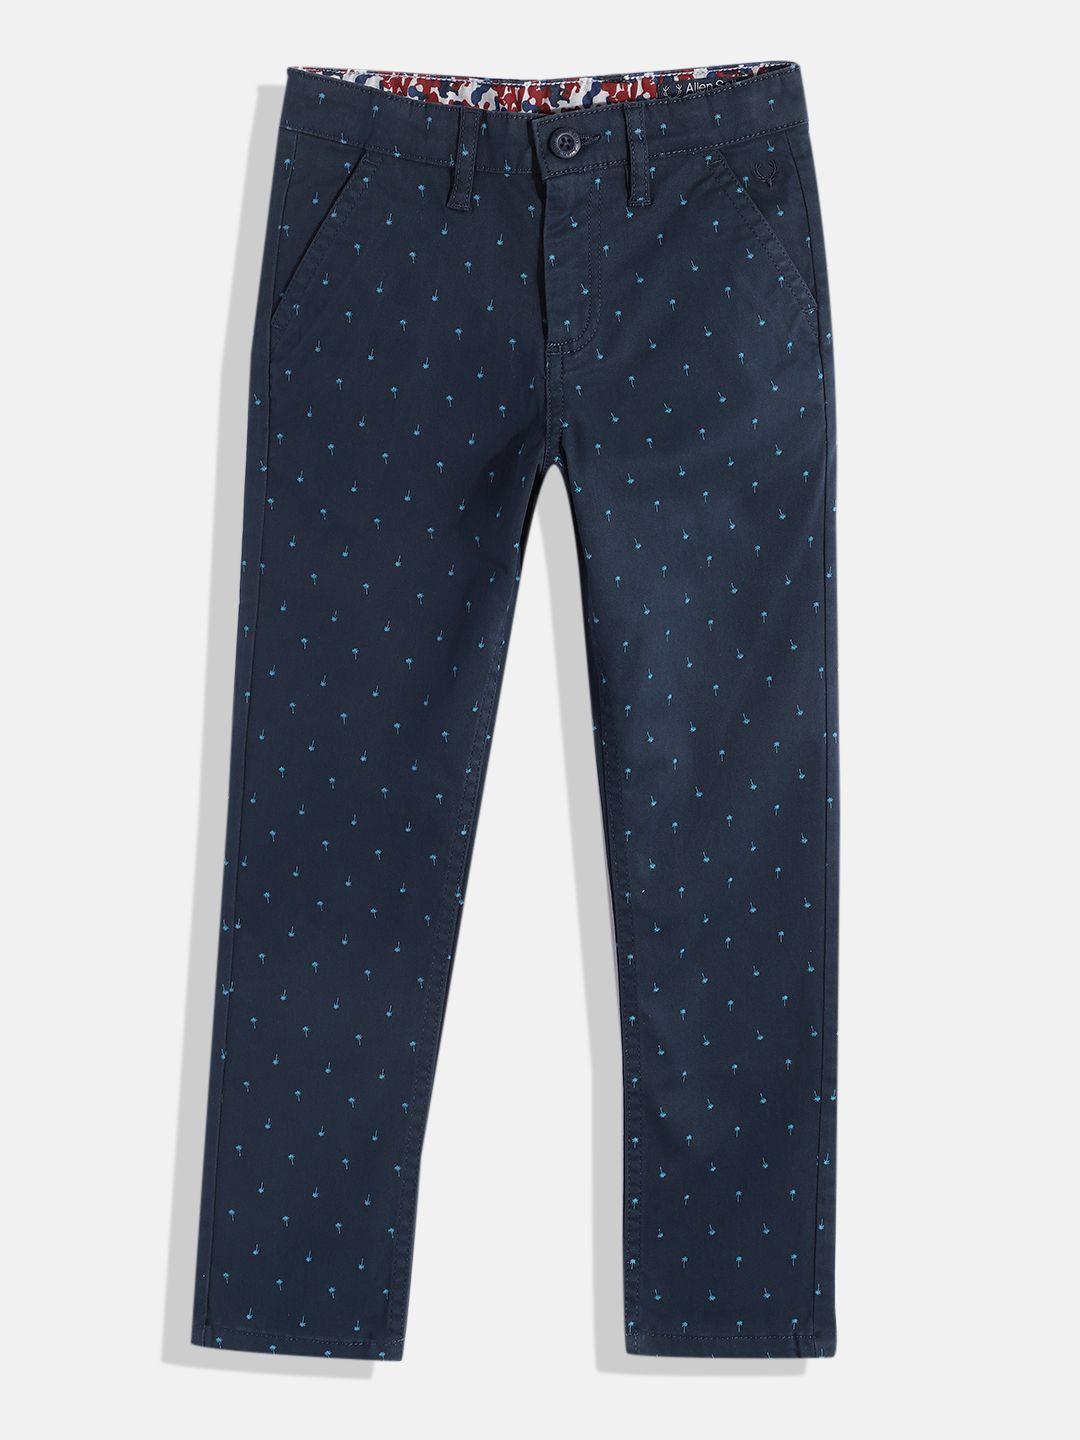 Allen Solly Junior Boys Tropical Printed Trousers